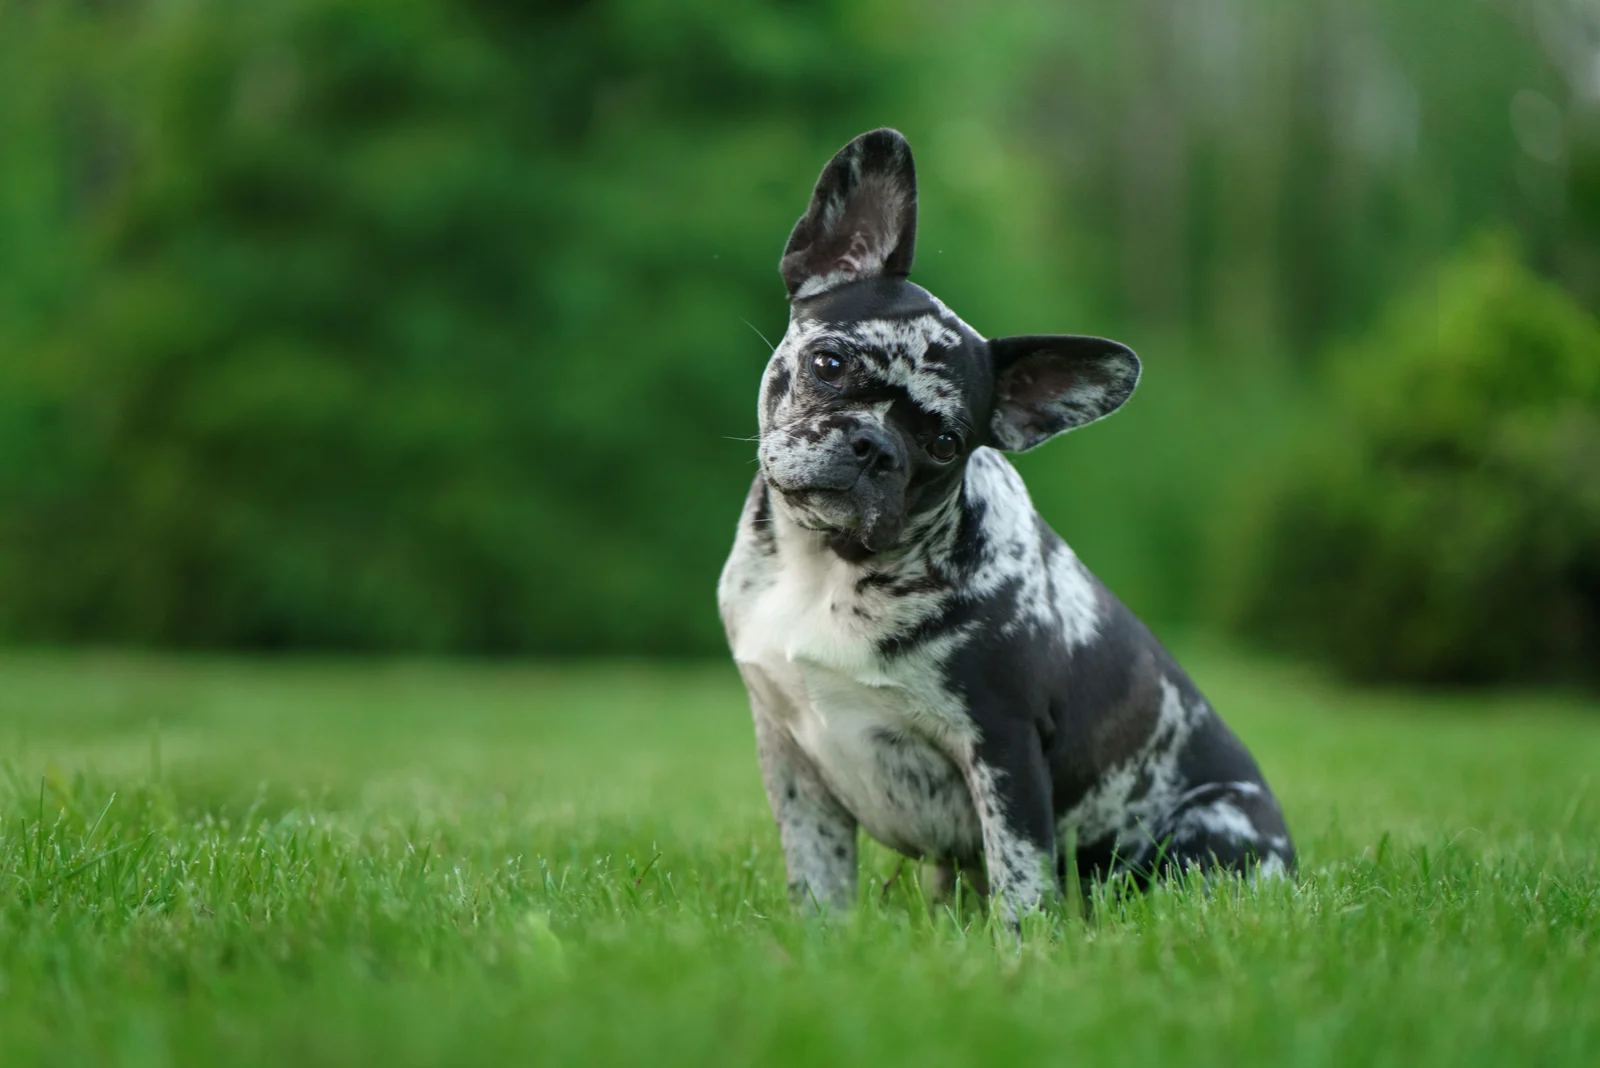 a French bulldog puppy sitting in the green grass